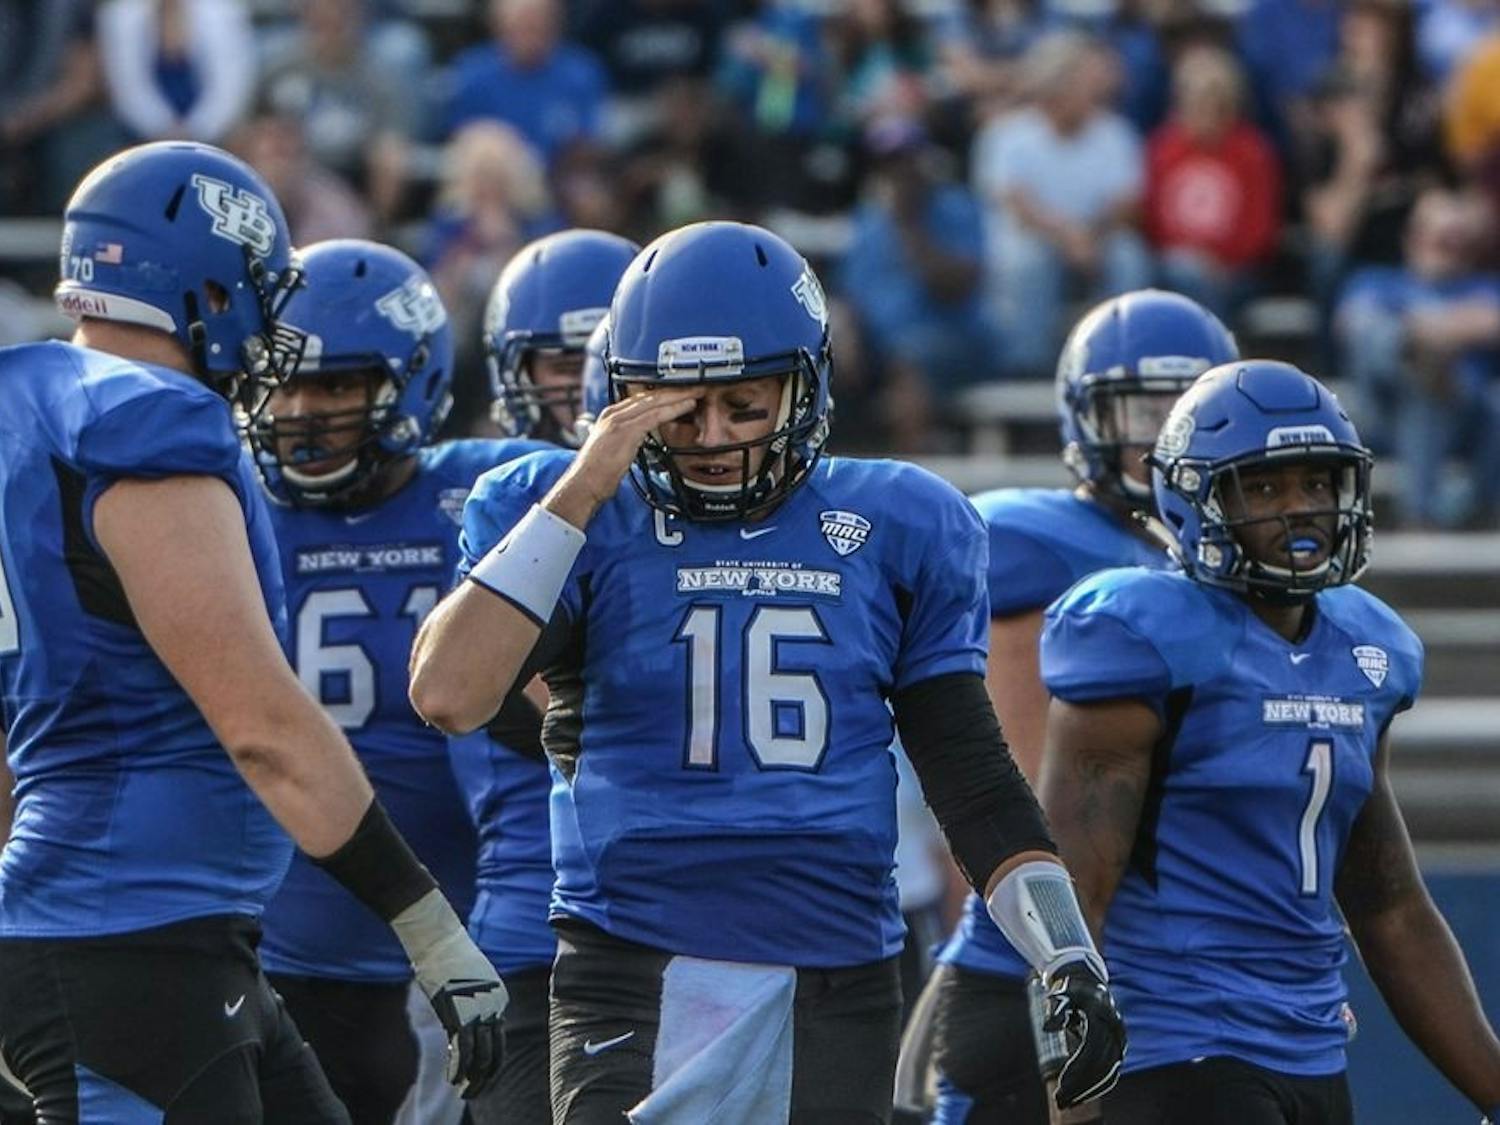 Former Bulls quarterback Joe Licata, with "New York" featured prominently on his jersey,&nbsp;walks off the field during a loss to Nevada at UB Stadium in September of 2015.&nbsp;Licata preferred the jerseys with the "Buffalo" patch that the team wore during his freshman season.&nbsp;